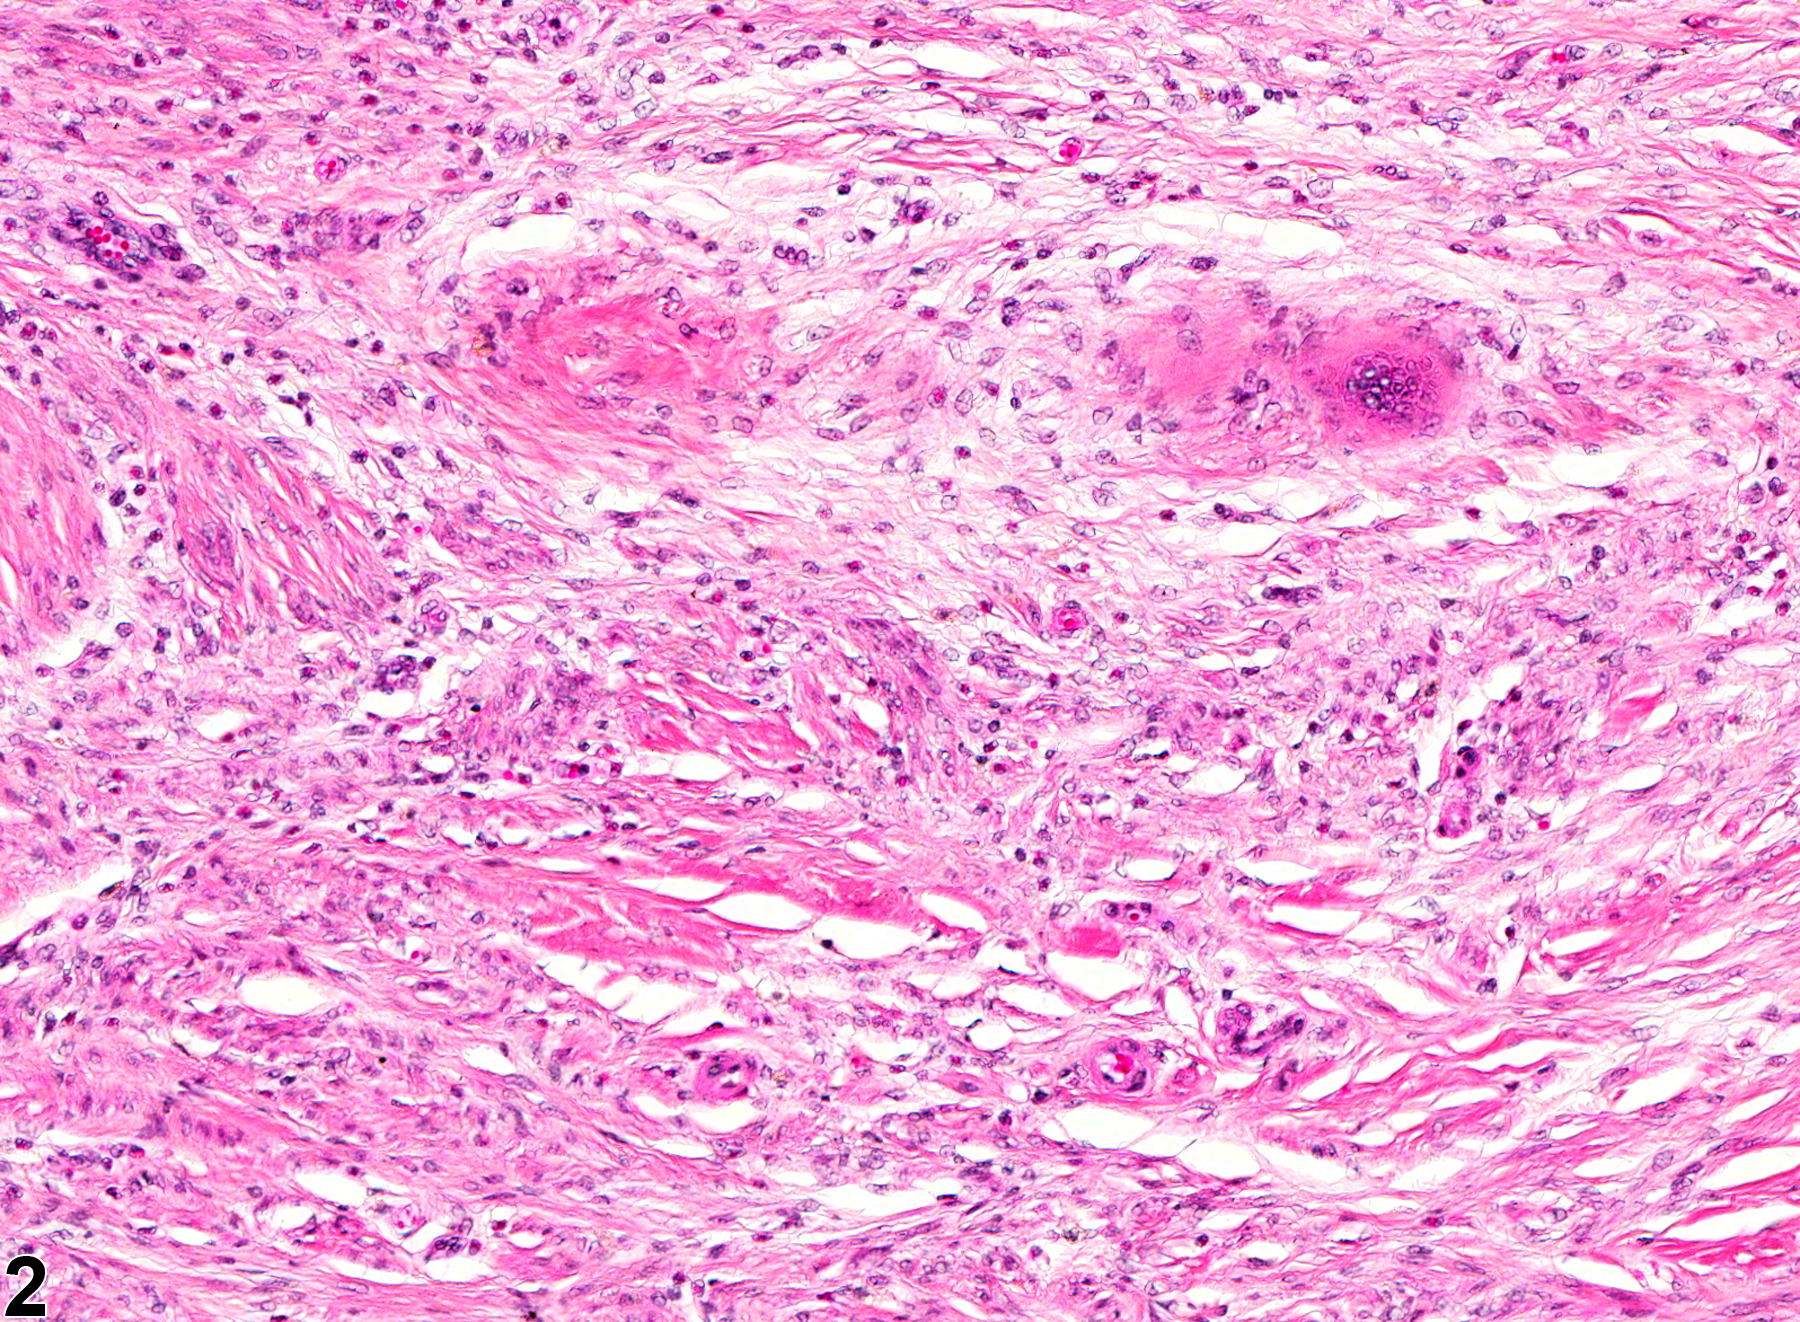 Image of fibrosis in the vagina from a female B6C3F1 mouse in a chronic study